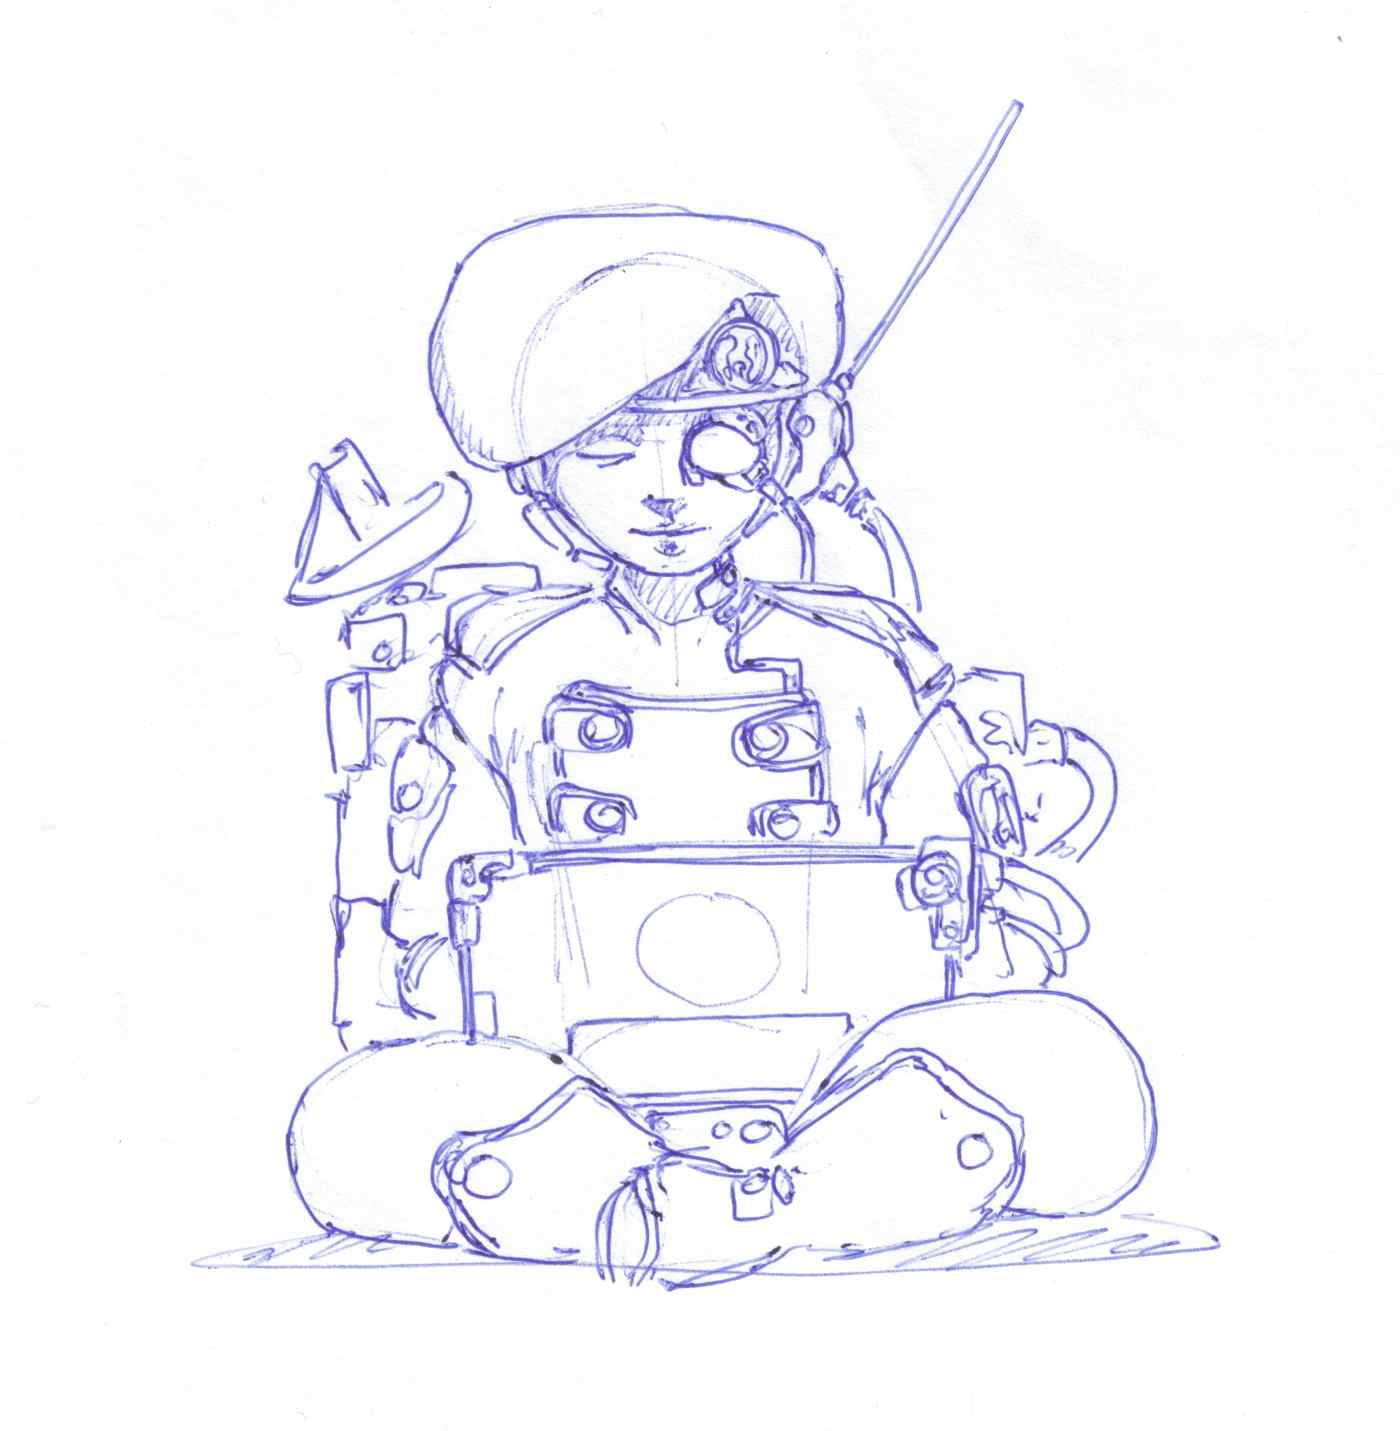 Character development sketch three, communications officer